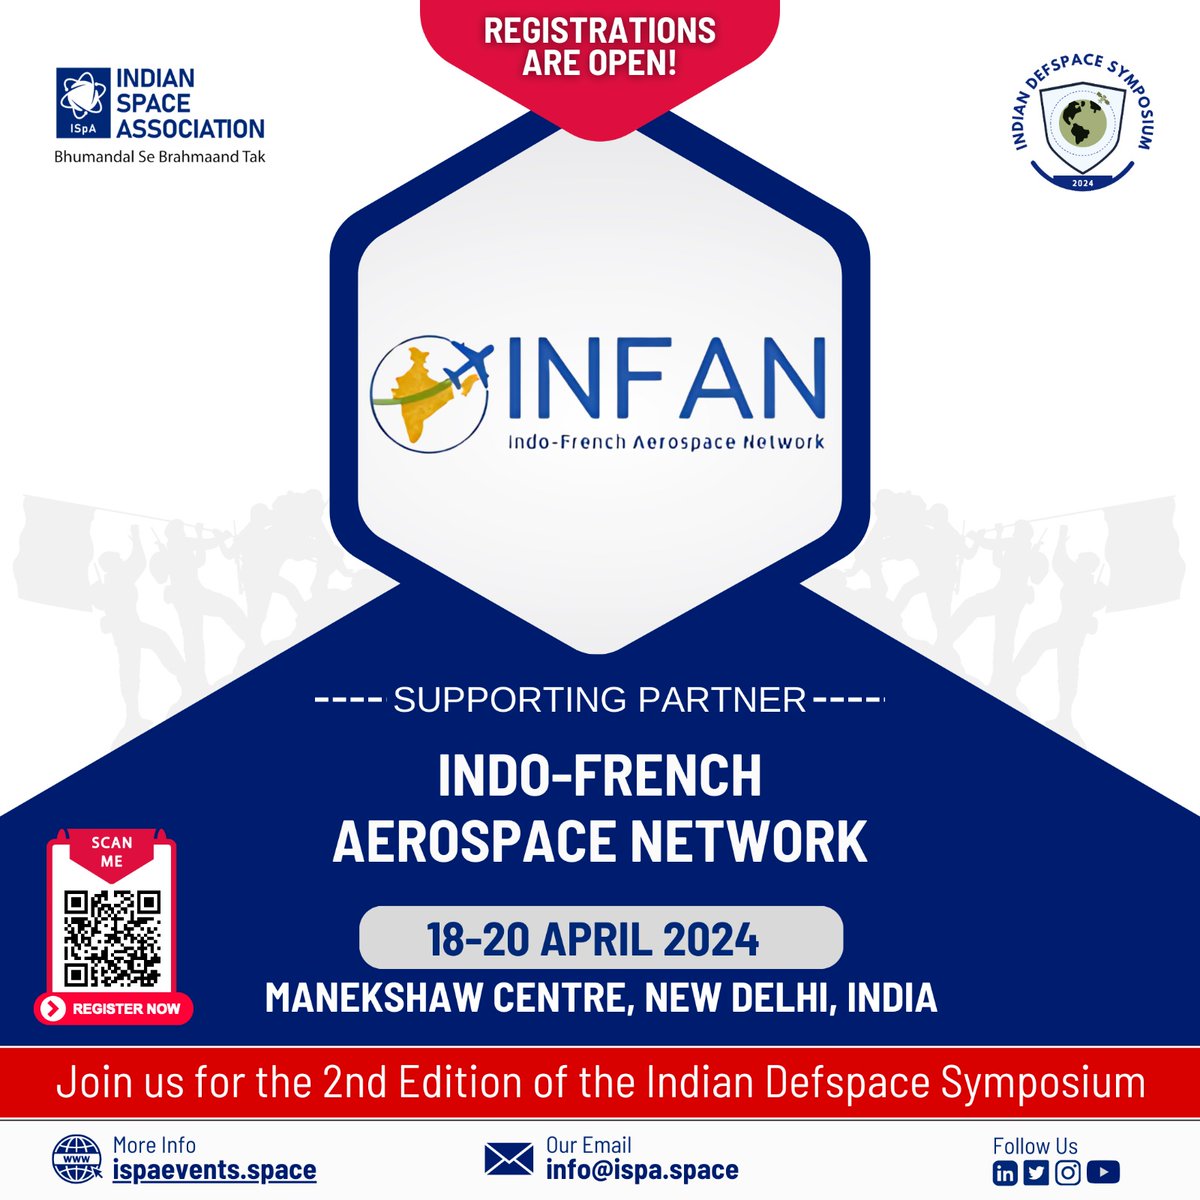 ISpA- Indian Space Association Welcome's INFAN - Indo-French Aerospace Network as a supporting partner for the Indian DefSpace Symposium 2024, 18-20 April, Manekshaw Centre, New Delhi, India. For registration, Scan the QR code or visit ispaevents.space.